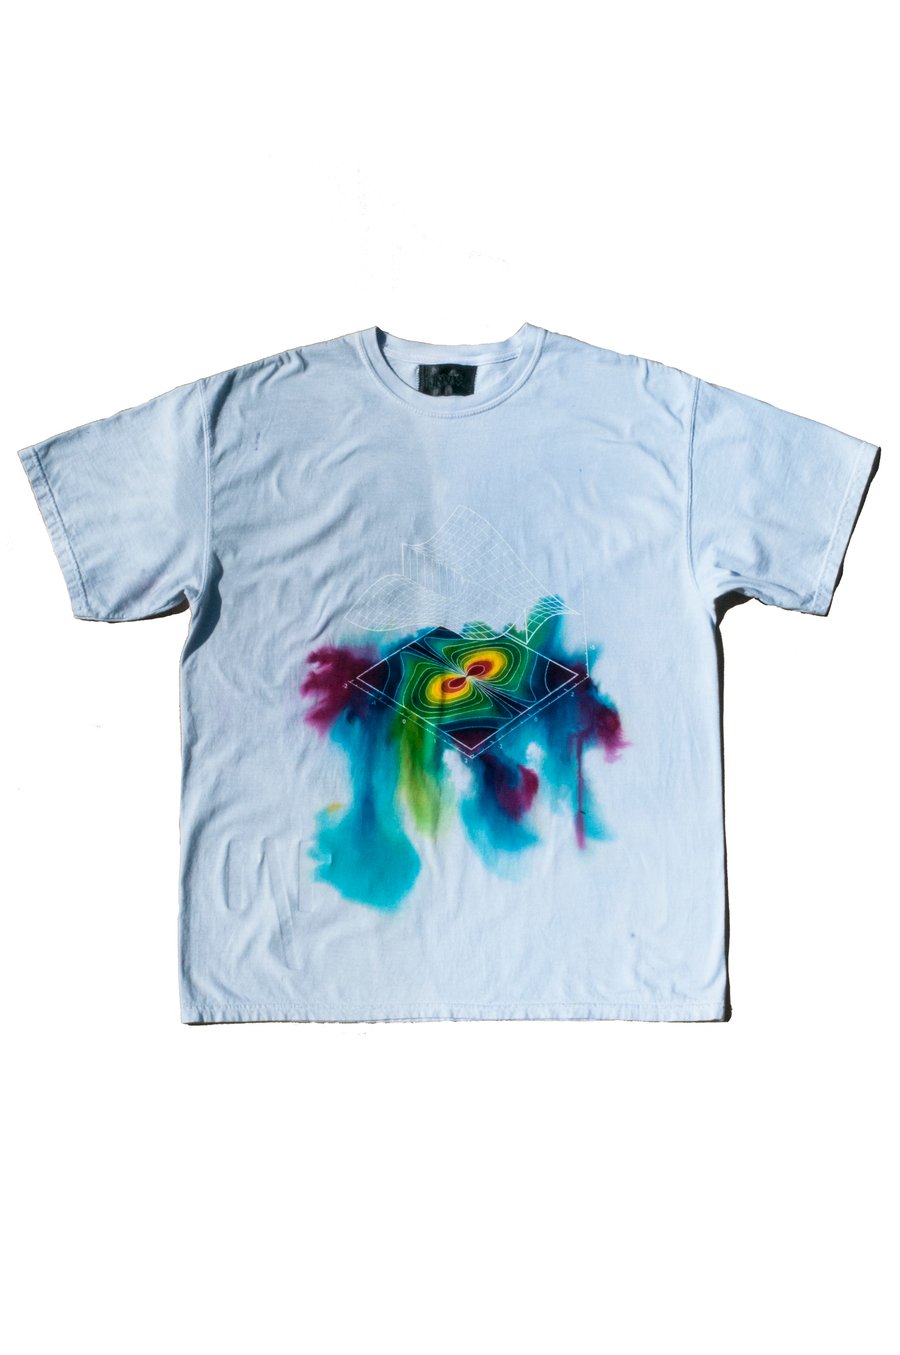 Image of "Pre-Frontal Anomaly" T-Shirt (1/1)